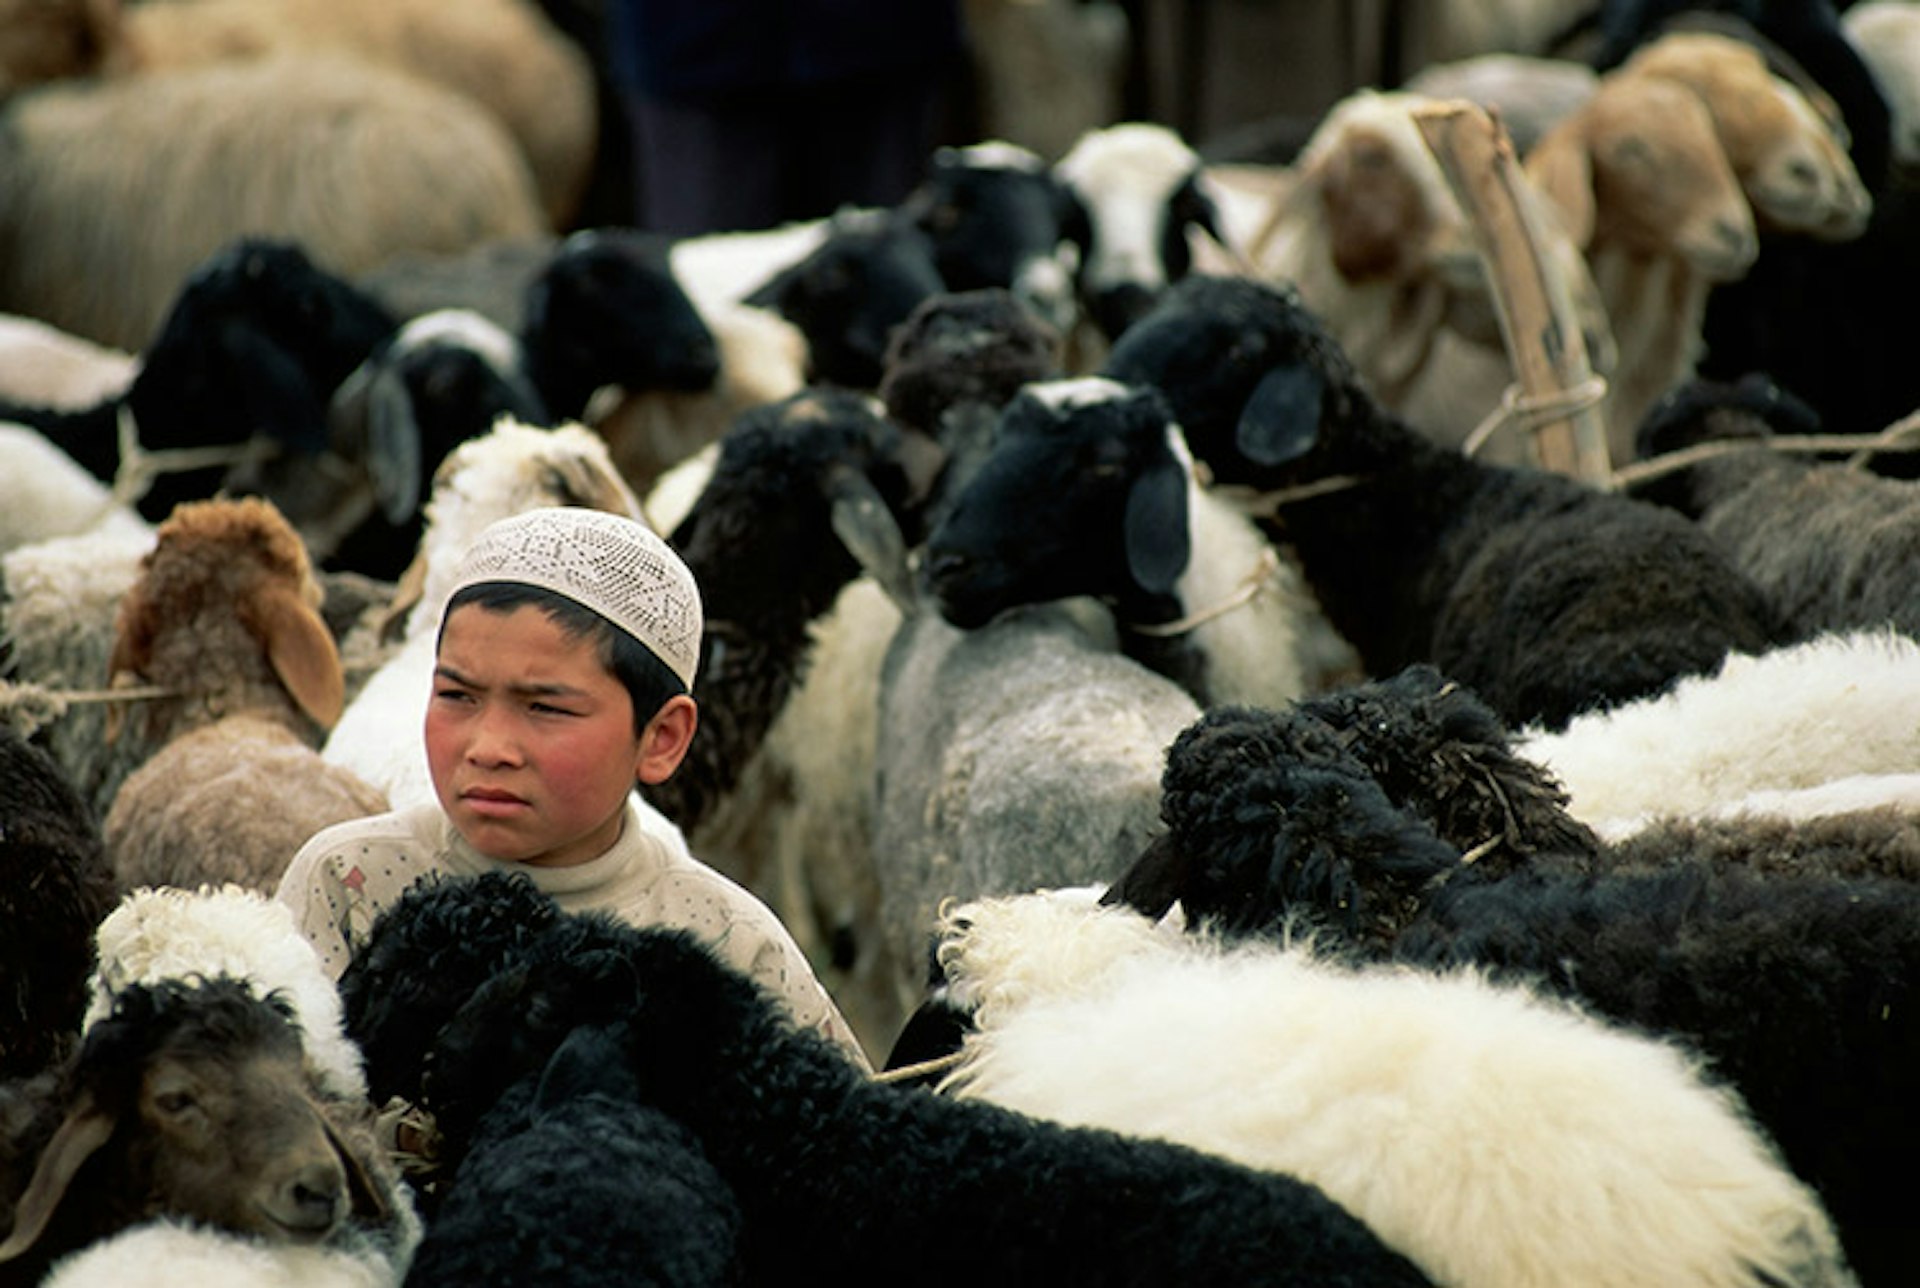 A young Uighur boy surrounded by sheep at the Sunday Market in Kashi, Xinjiang, China. Image by Upperhall Ltd / Robert Harding World Imagery / Getty Images